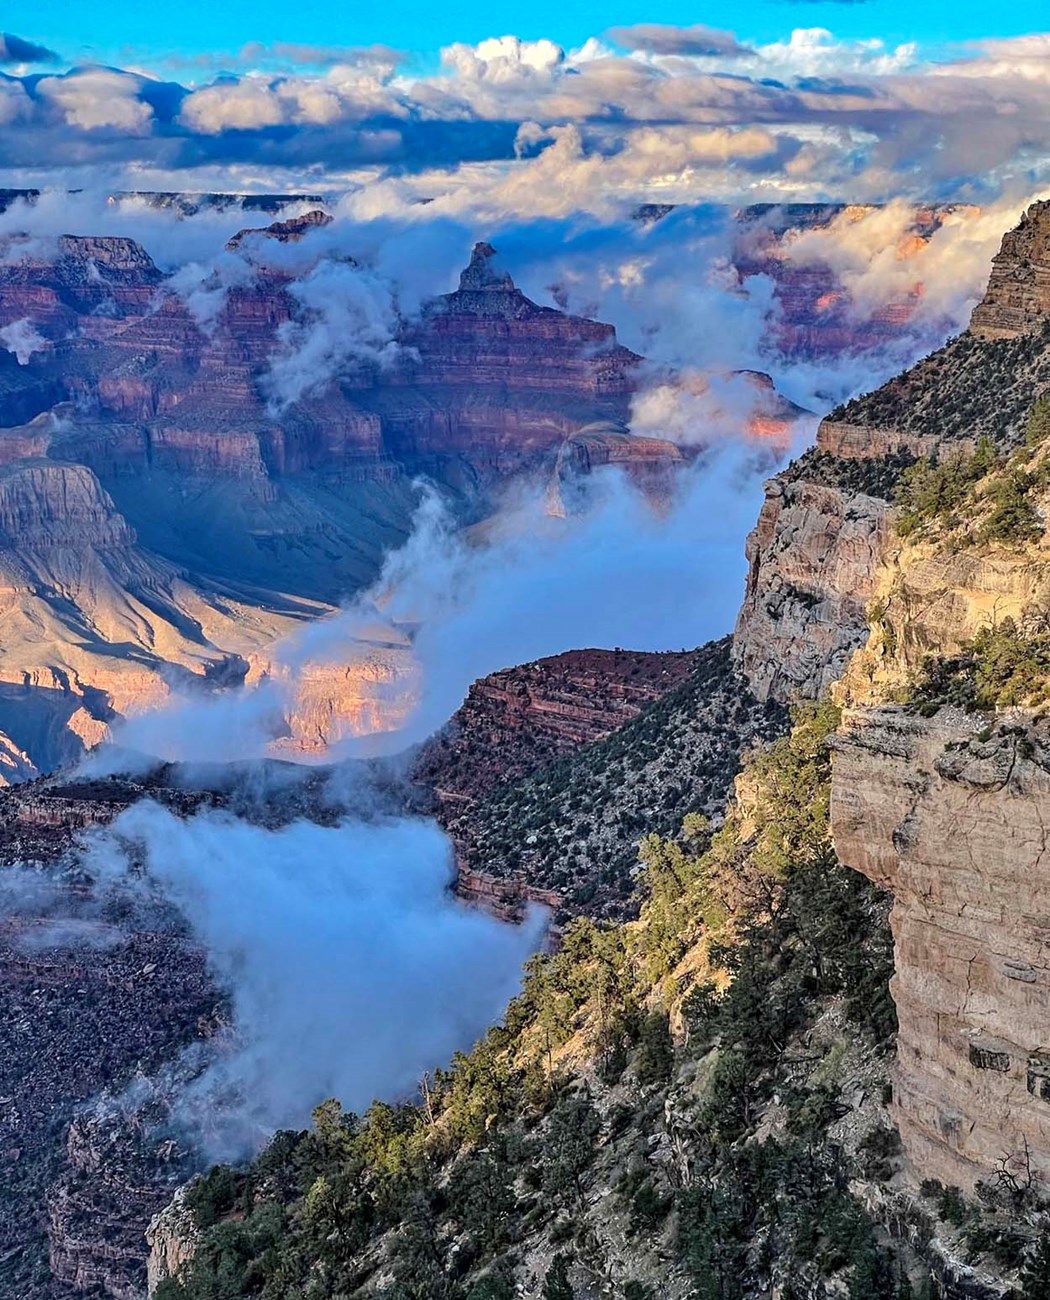 looking down into a vast canyon landscape filled with colorful peaks and cliffs as low hanging clouds crisscross the view.